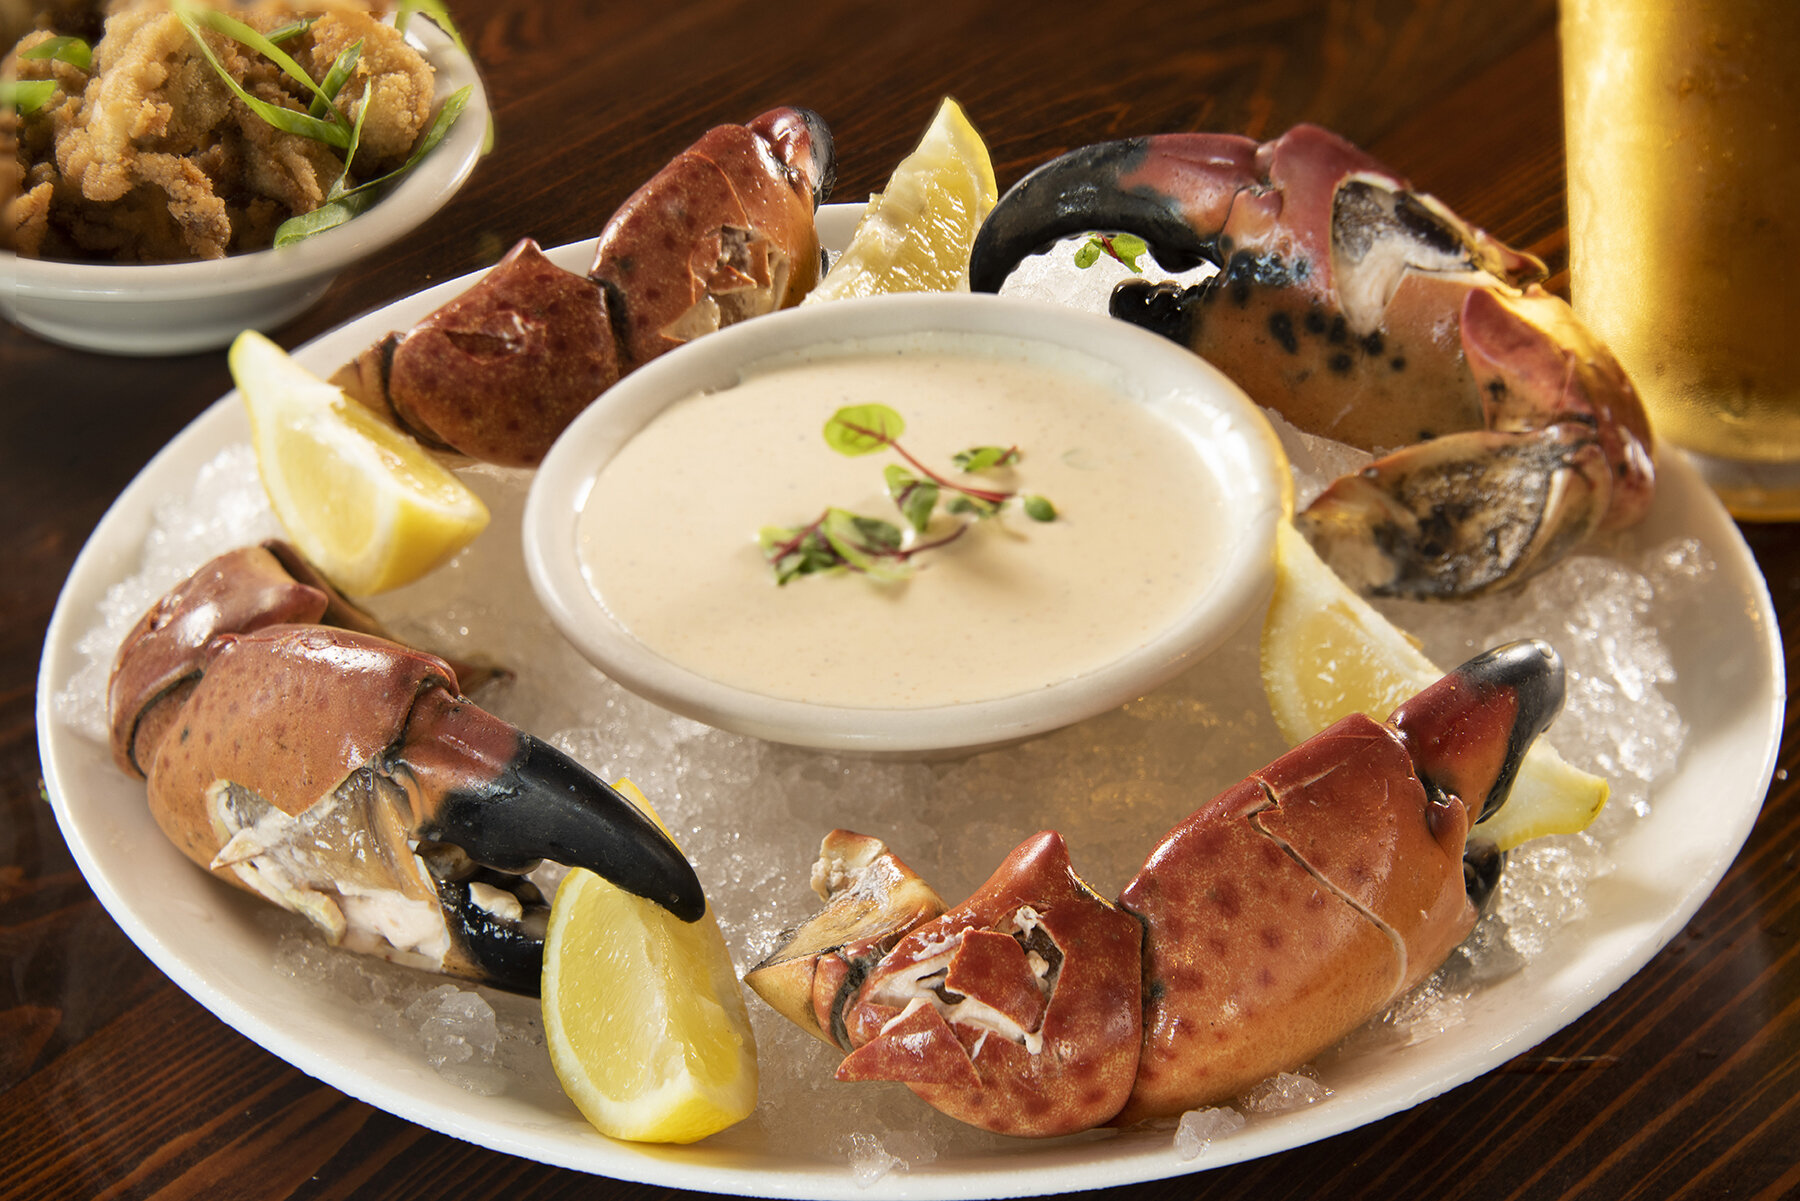 HUDSONS SEAFOOD HOUSE ON THE DOCKS - CLICK TO READ